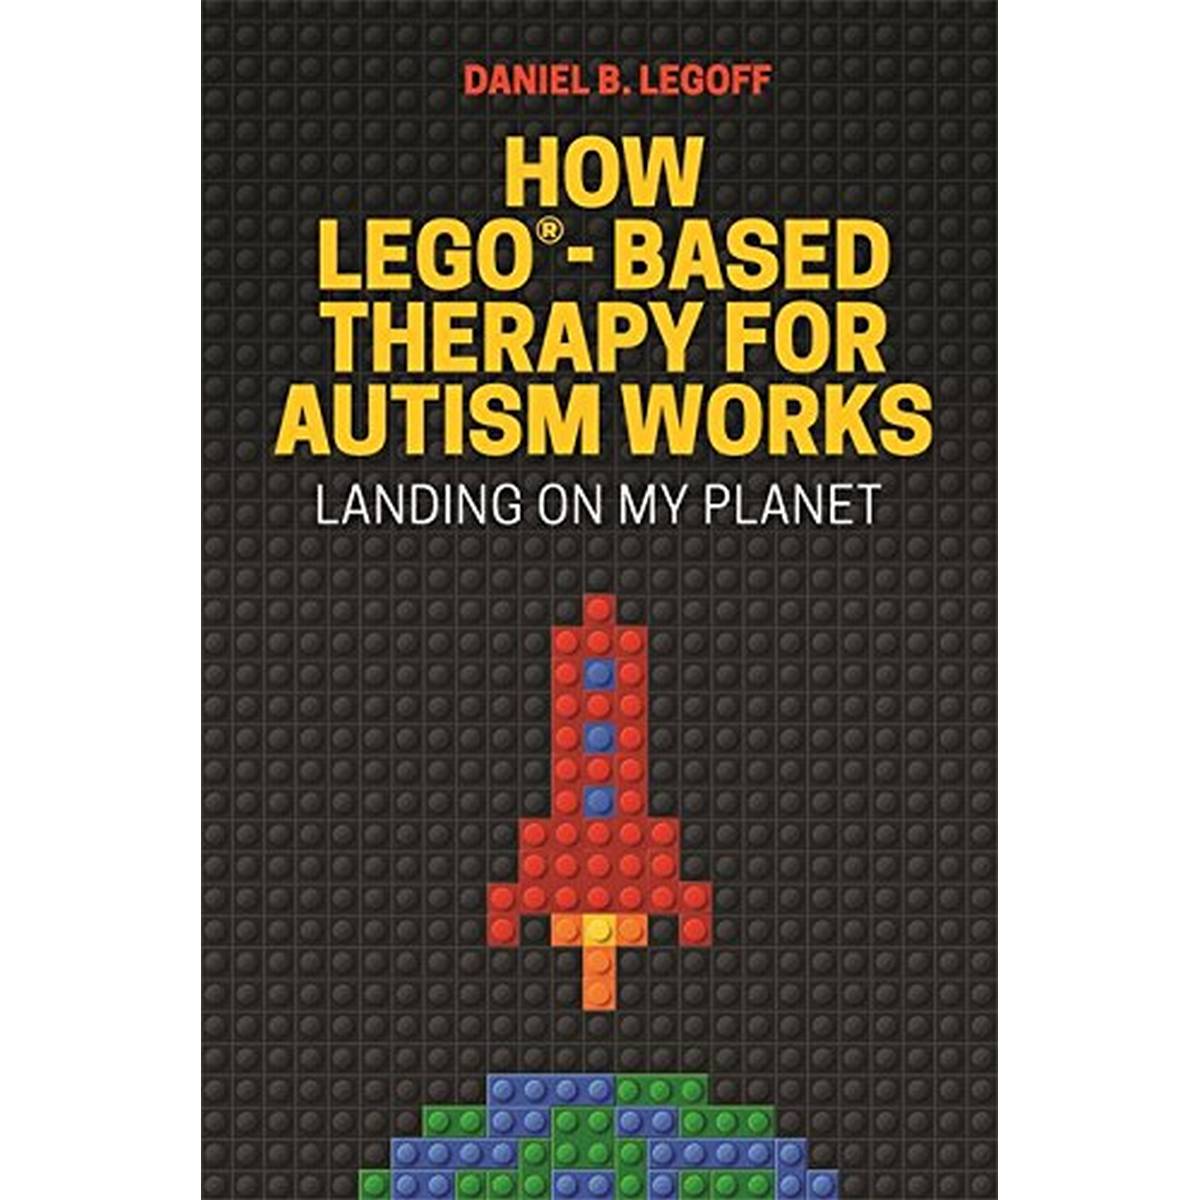 How LEGO-Based Therapy for Autism Works